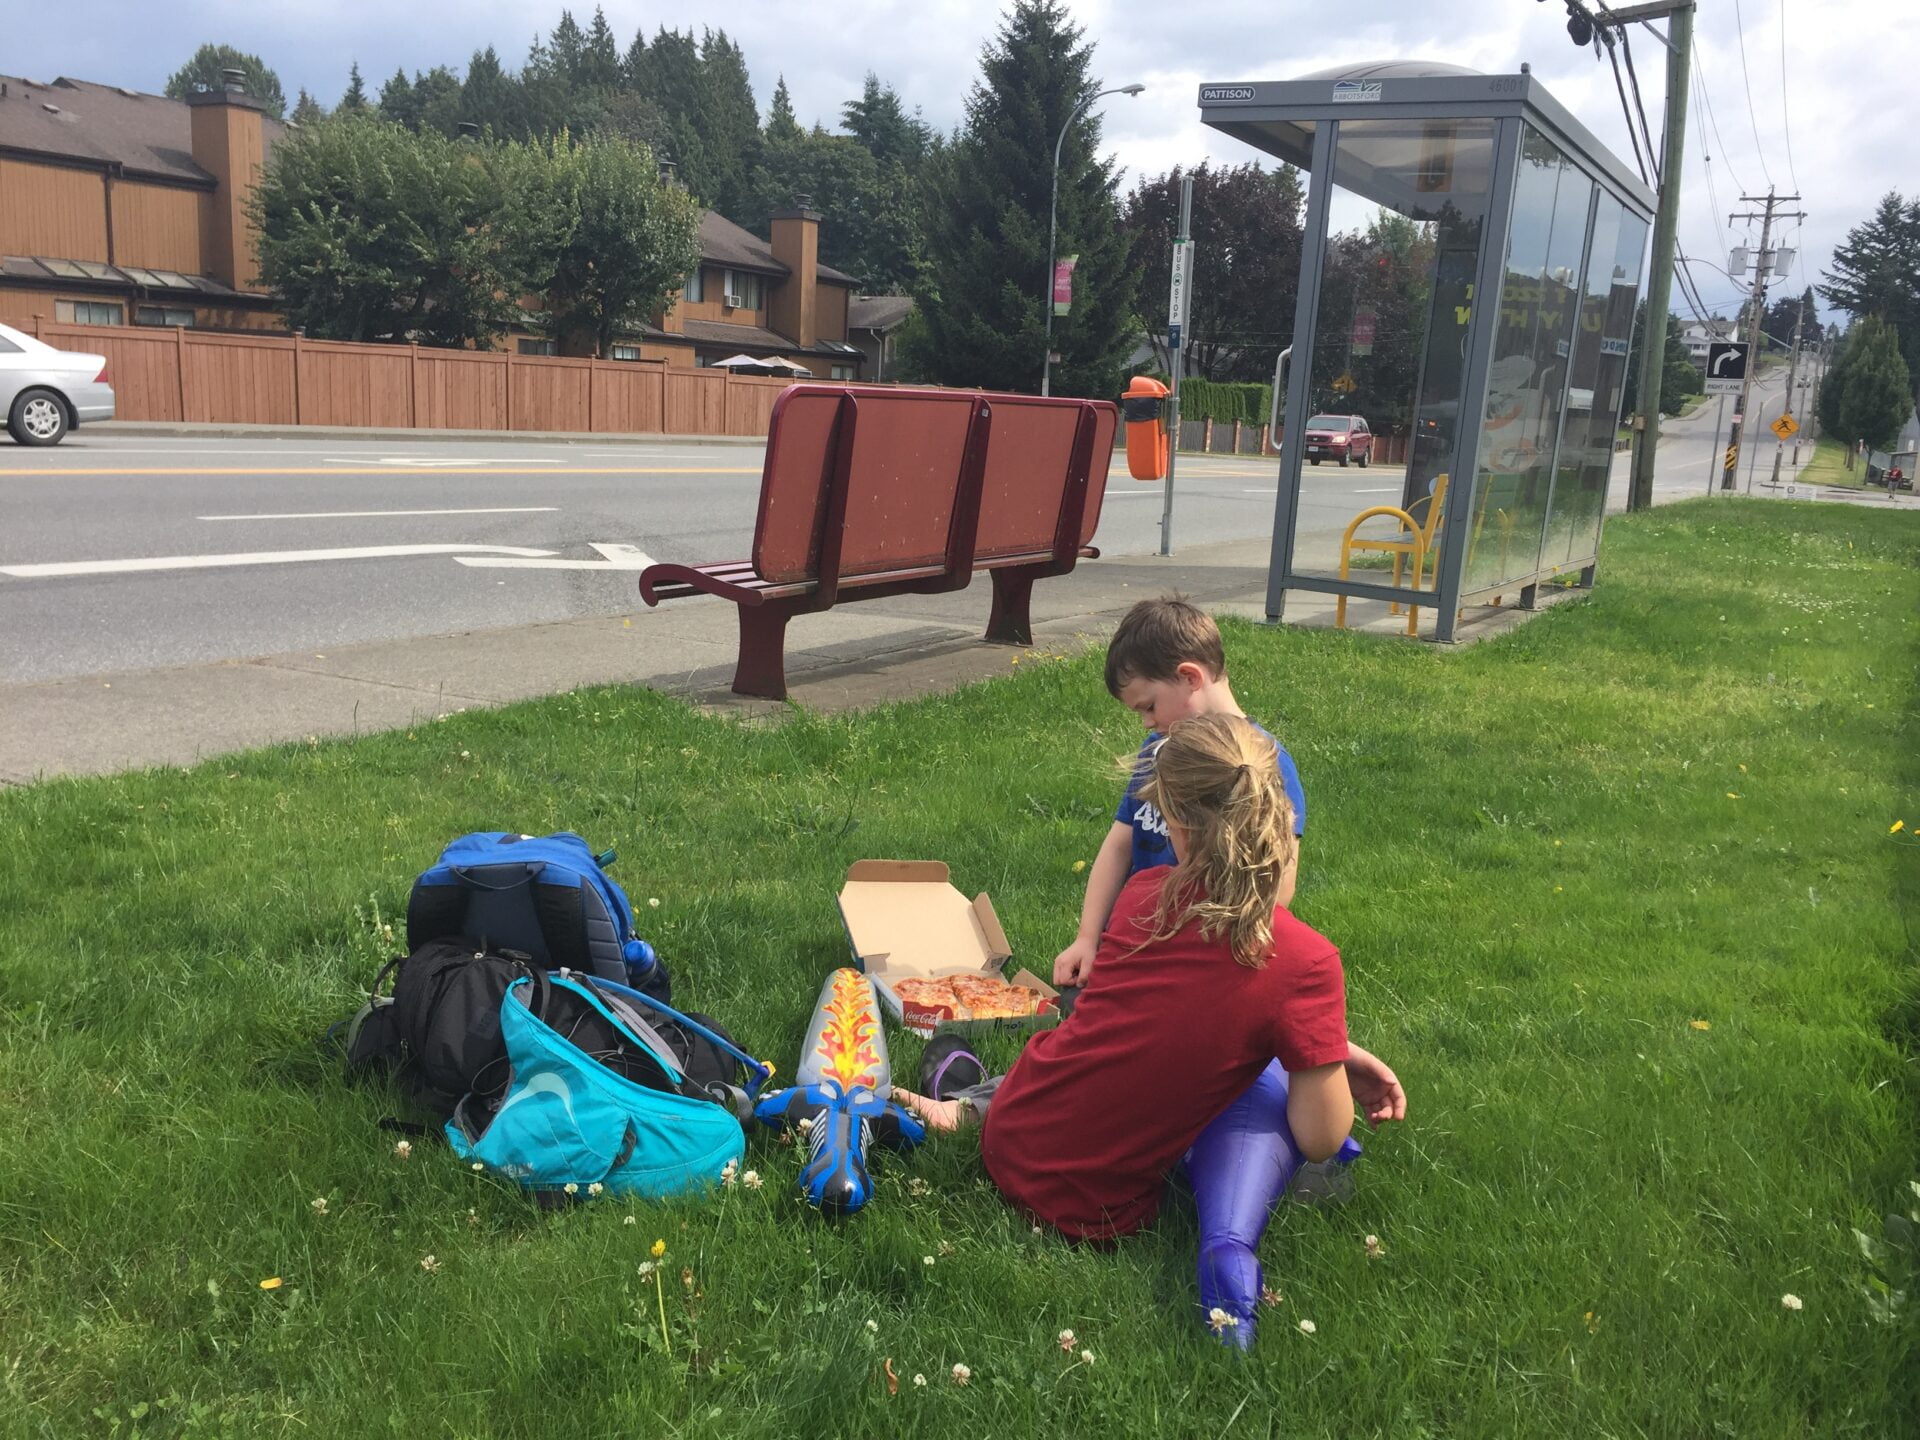 Bus Stop Lunch Time with #ExploreBCbyBus